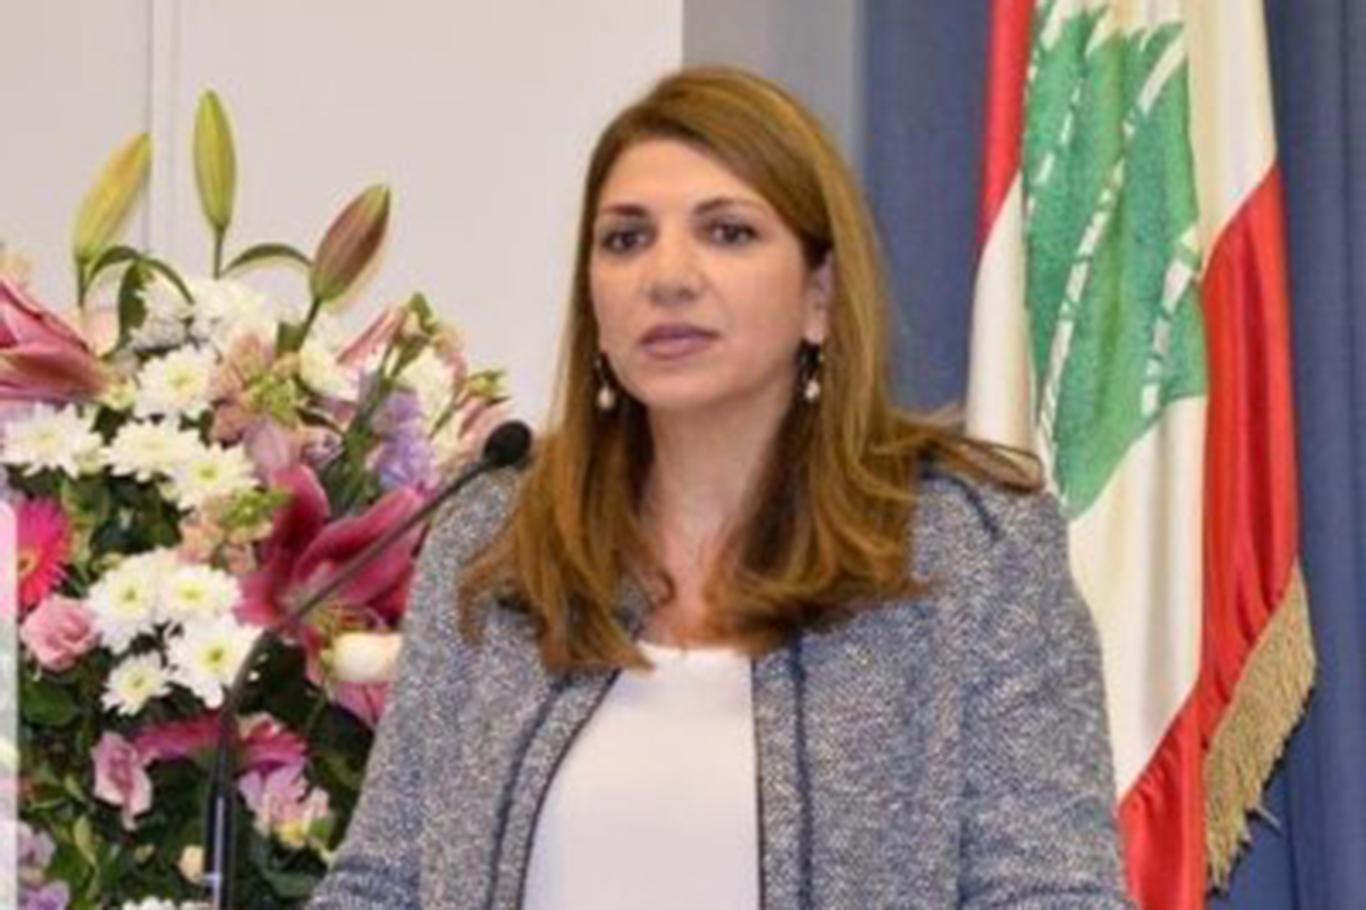 Lebanon’s Justice Minister resigns from her position